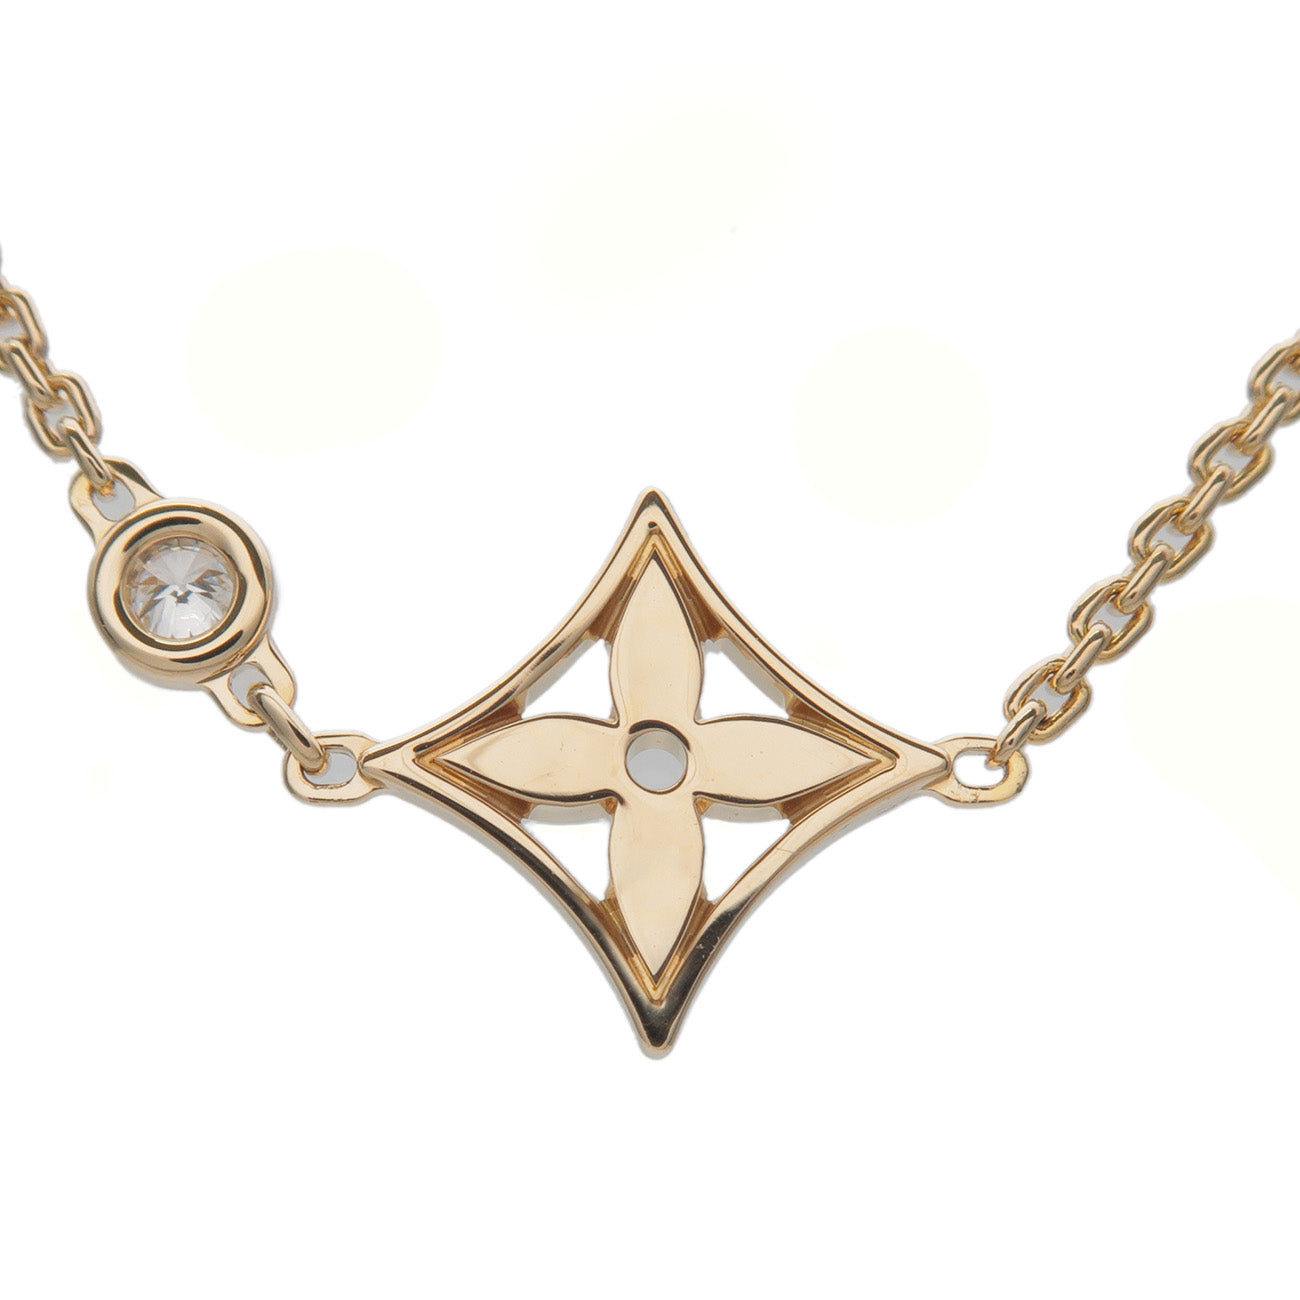 Products by Louis Vuitton: Idylle Blossom Charms Necklace, 3 Golds